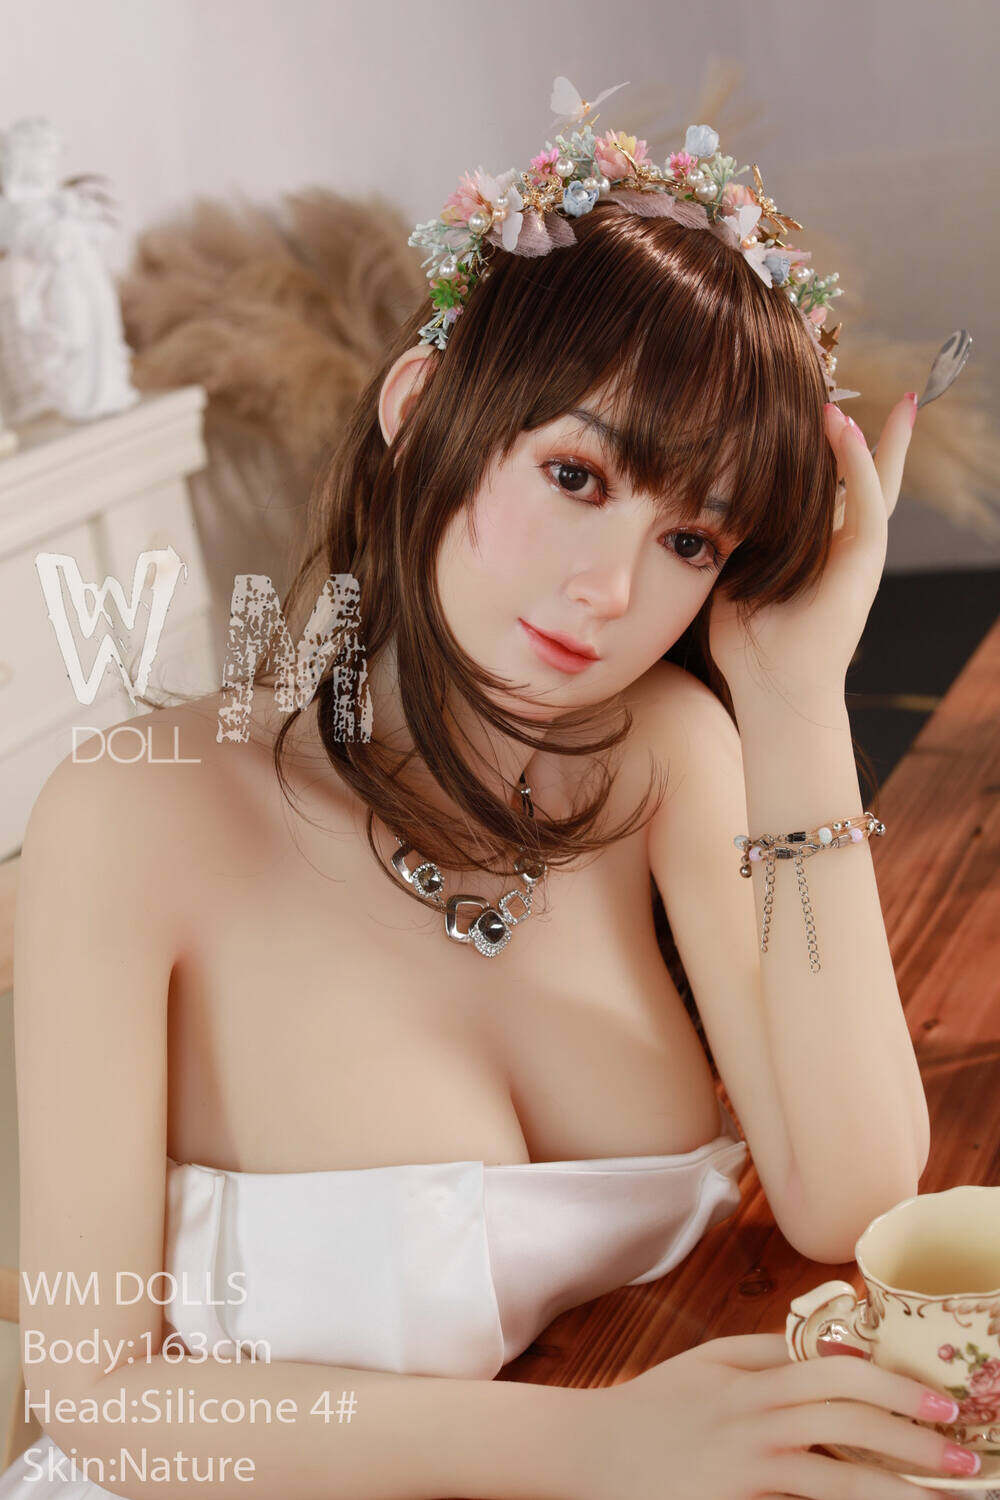 Abbygail - 163cm(5ft4) C-Cup WM 163cm(5ft4) Real Dolls Come Sex Doll image11